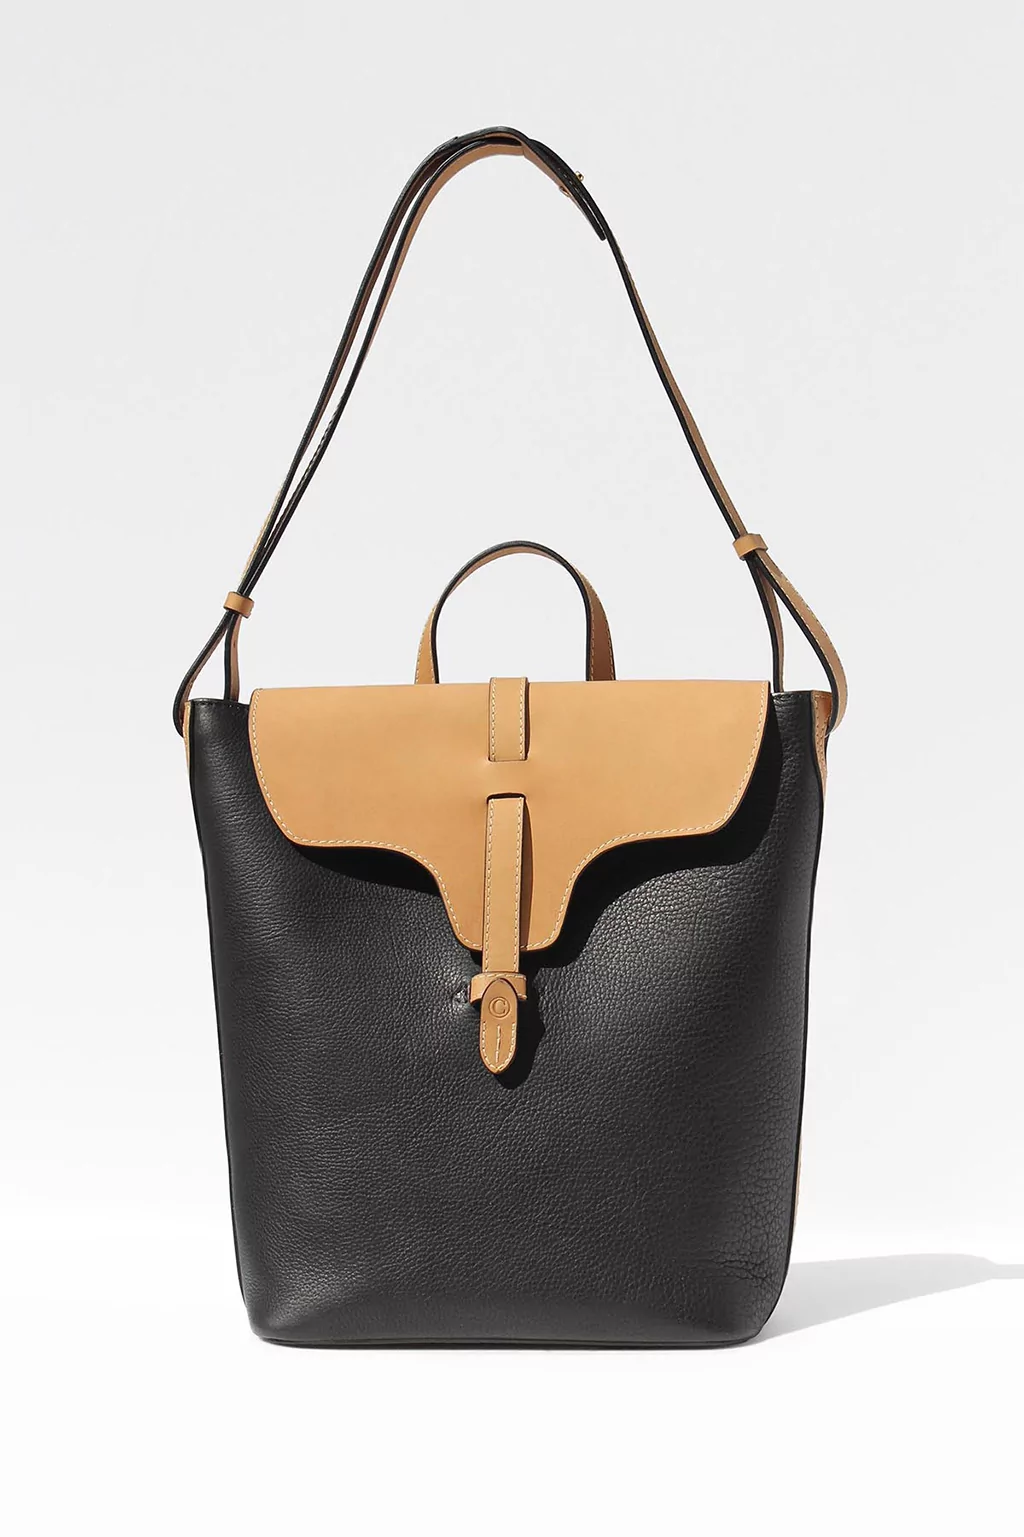 Thela Black Leather Tote Bag for Women